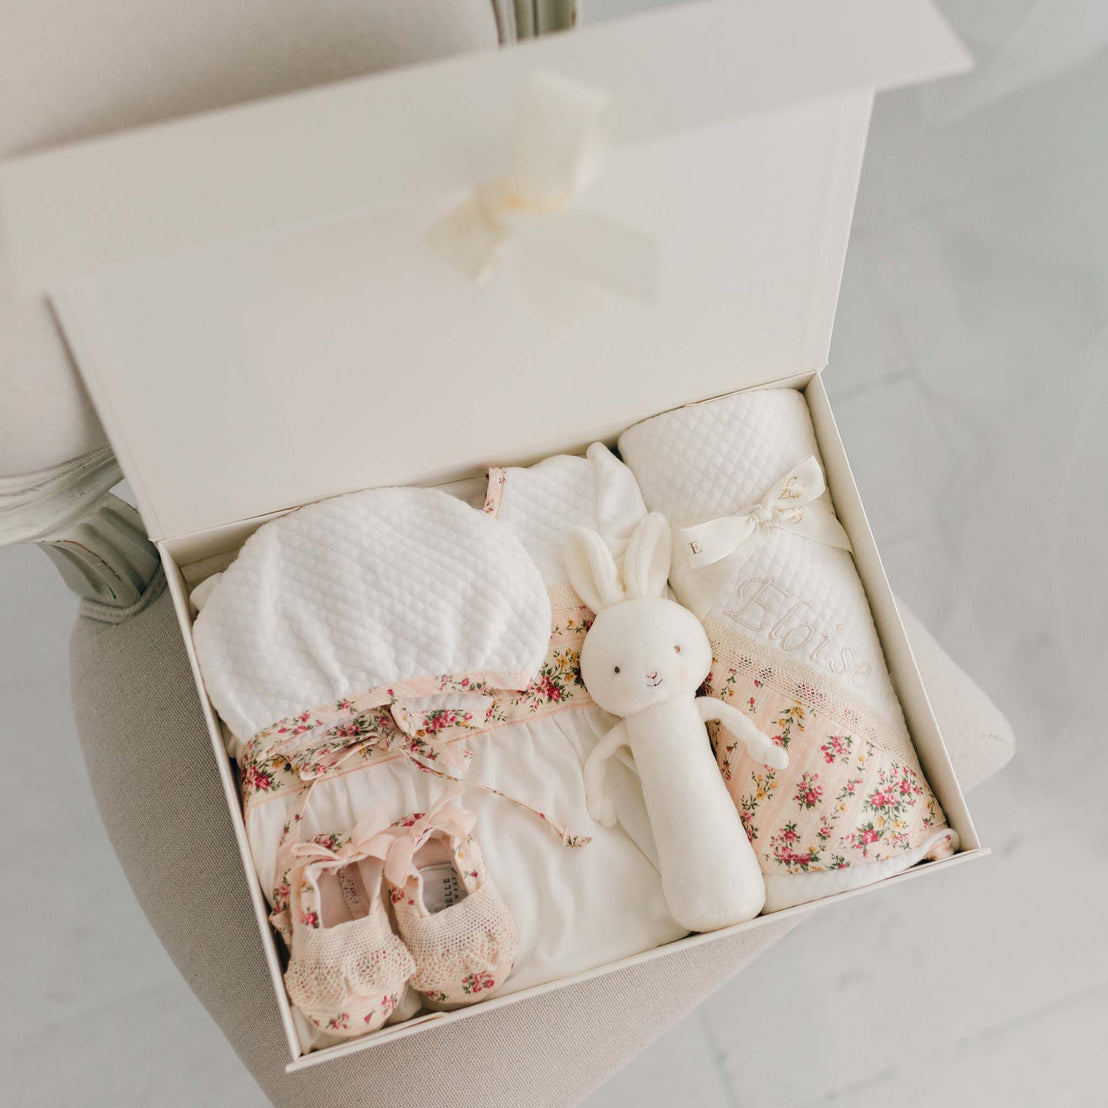 The "Blush" Eloise Newborn Gift Set in the gift box, including the Layette Gown Bonnet, Booties, Bunny Chime, and Blanket.